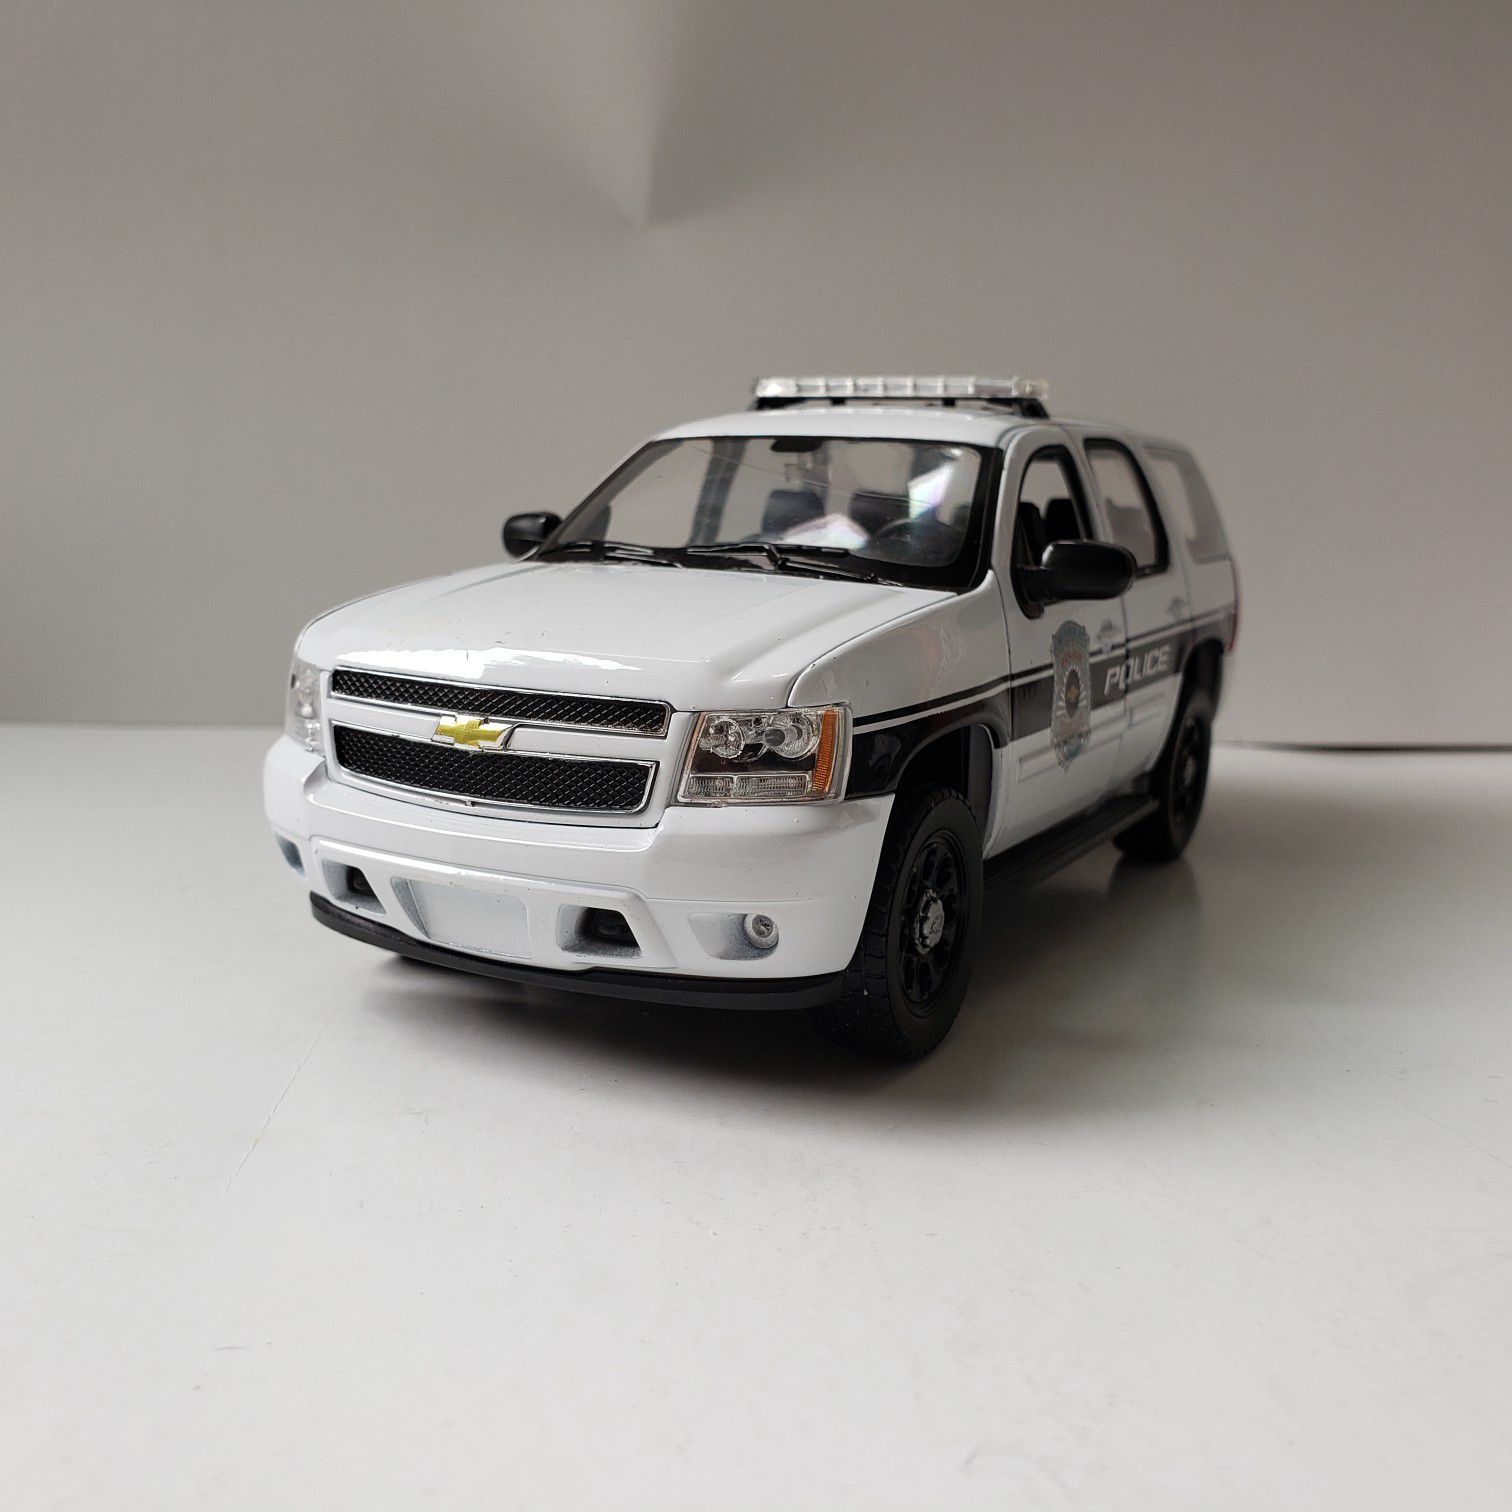 NEW Large 2008 Chevy Tahoe SUV Police Cop Car Toy Diecast Metal Model Scale 1/24 1:24 124 Chevrolet